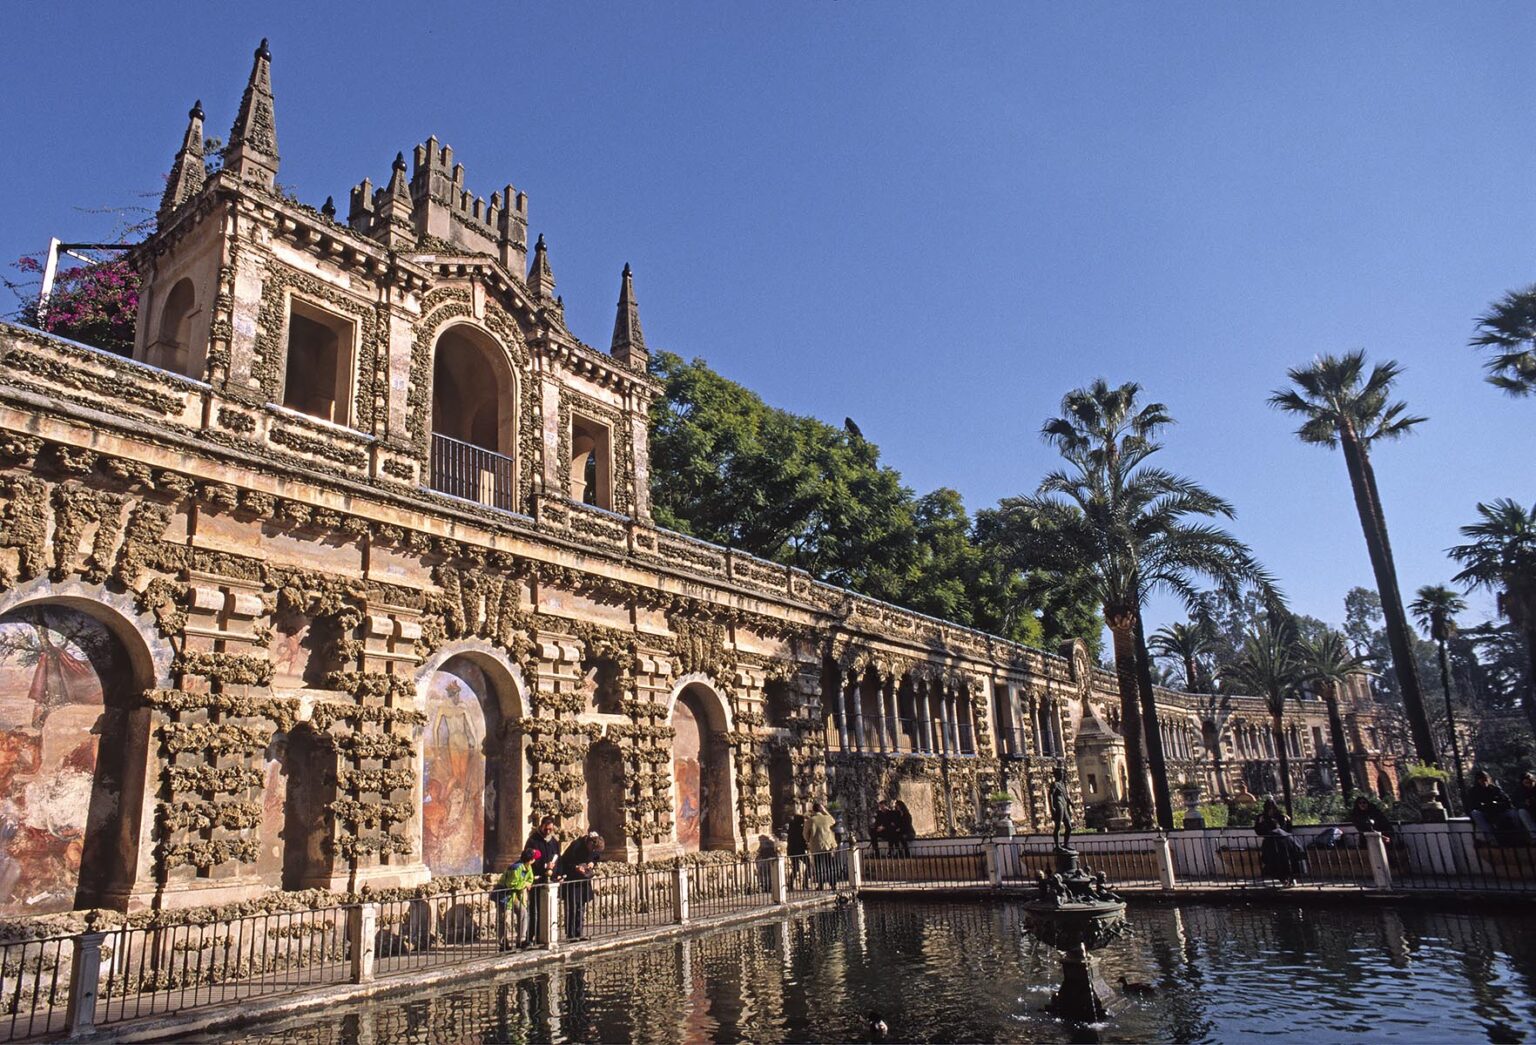 GARDEN OF THE POOL OF MERCURY in the ALCAZAR which was completed in 1577 - SEVILLA